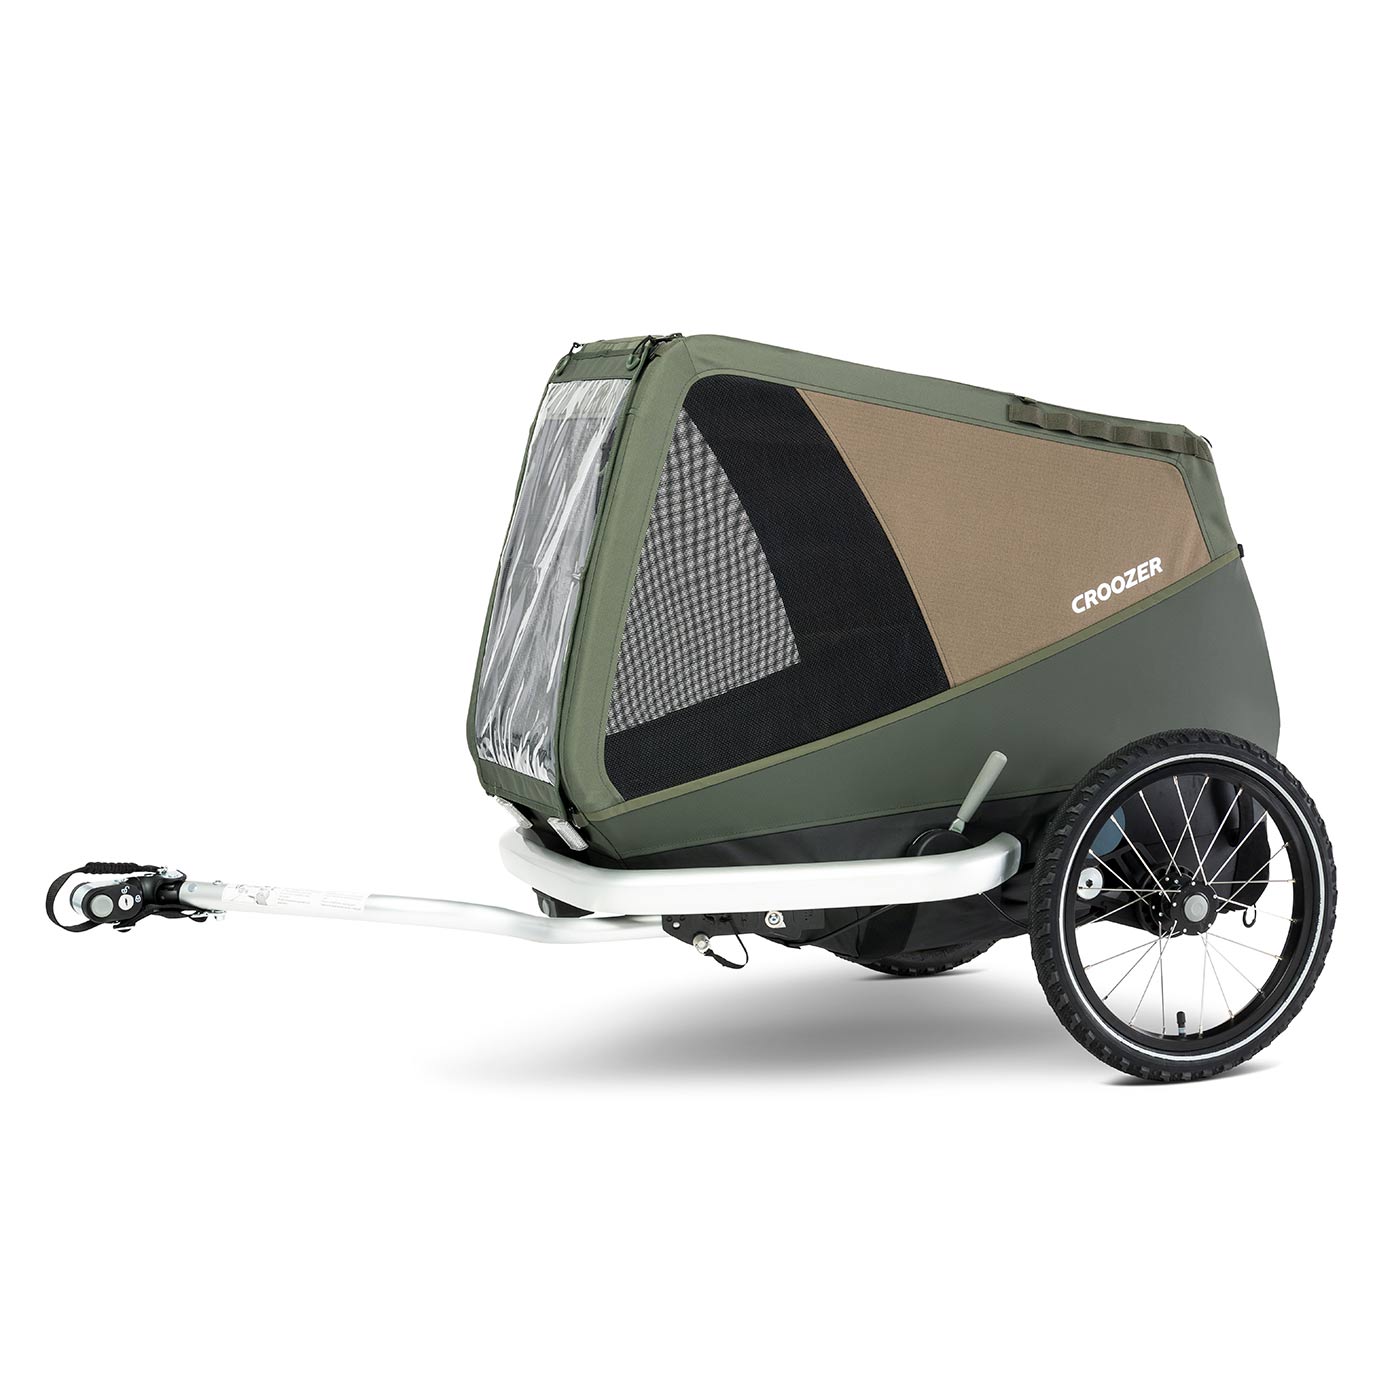 Picture of Croozer Dog Enna - Bike Trailer for Dogs - moss green